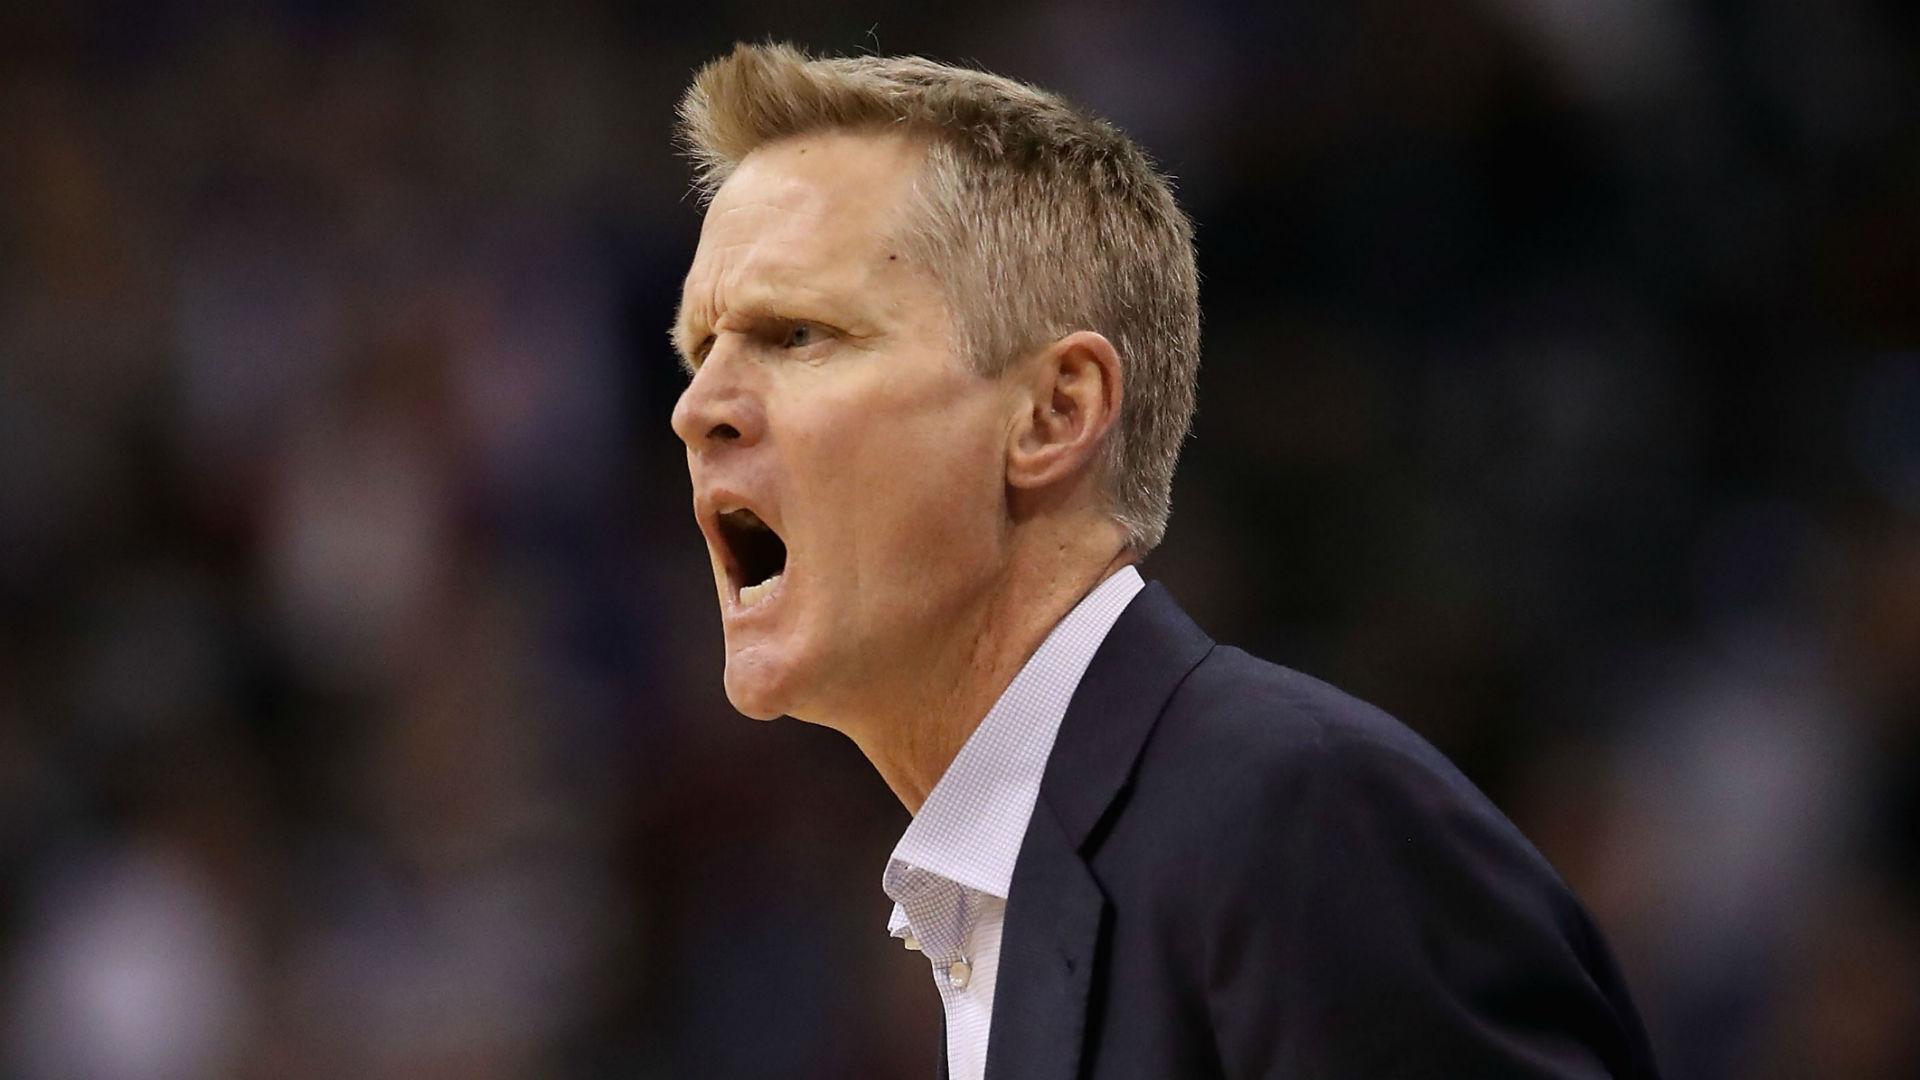 Steve Kerr was fined by the NBA after his outburst during the Golden State Warriors' loss to the Portland Trail Blazers.